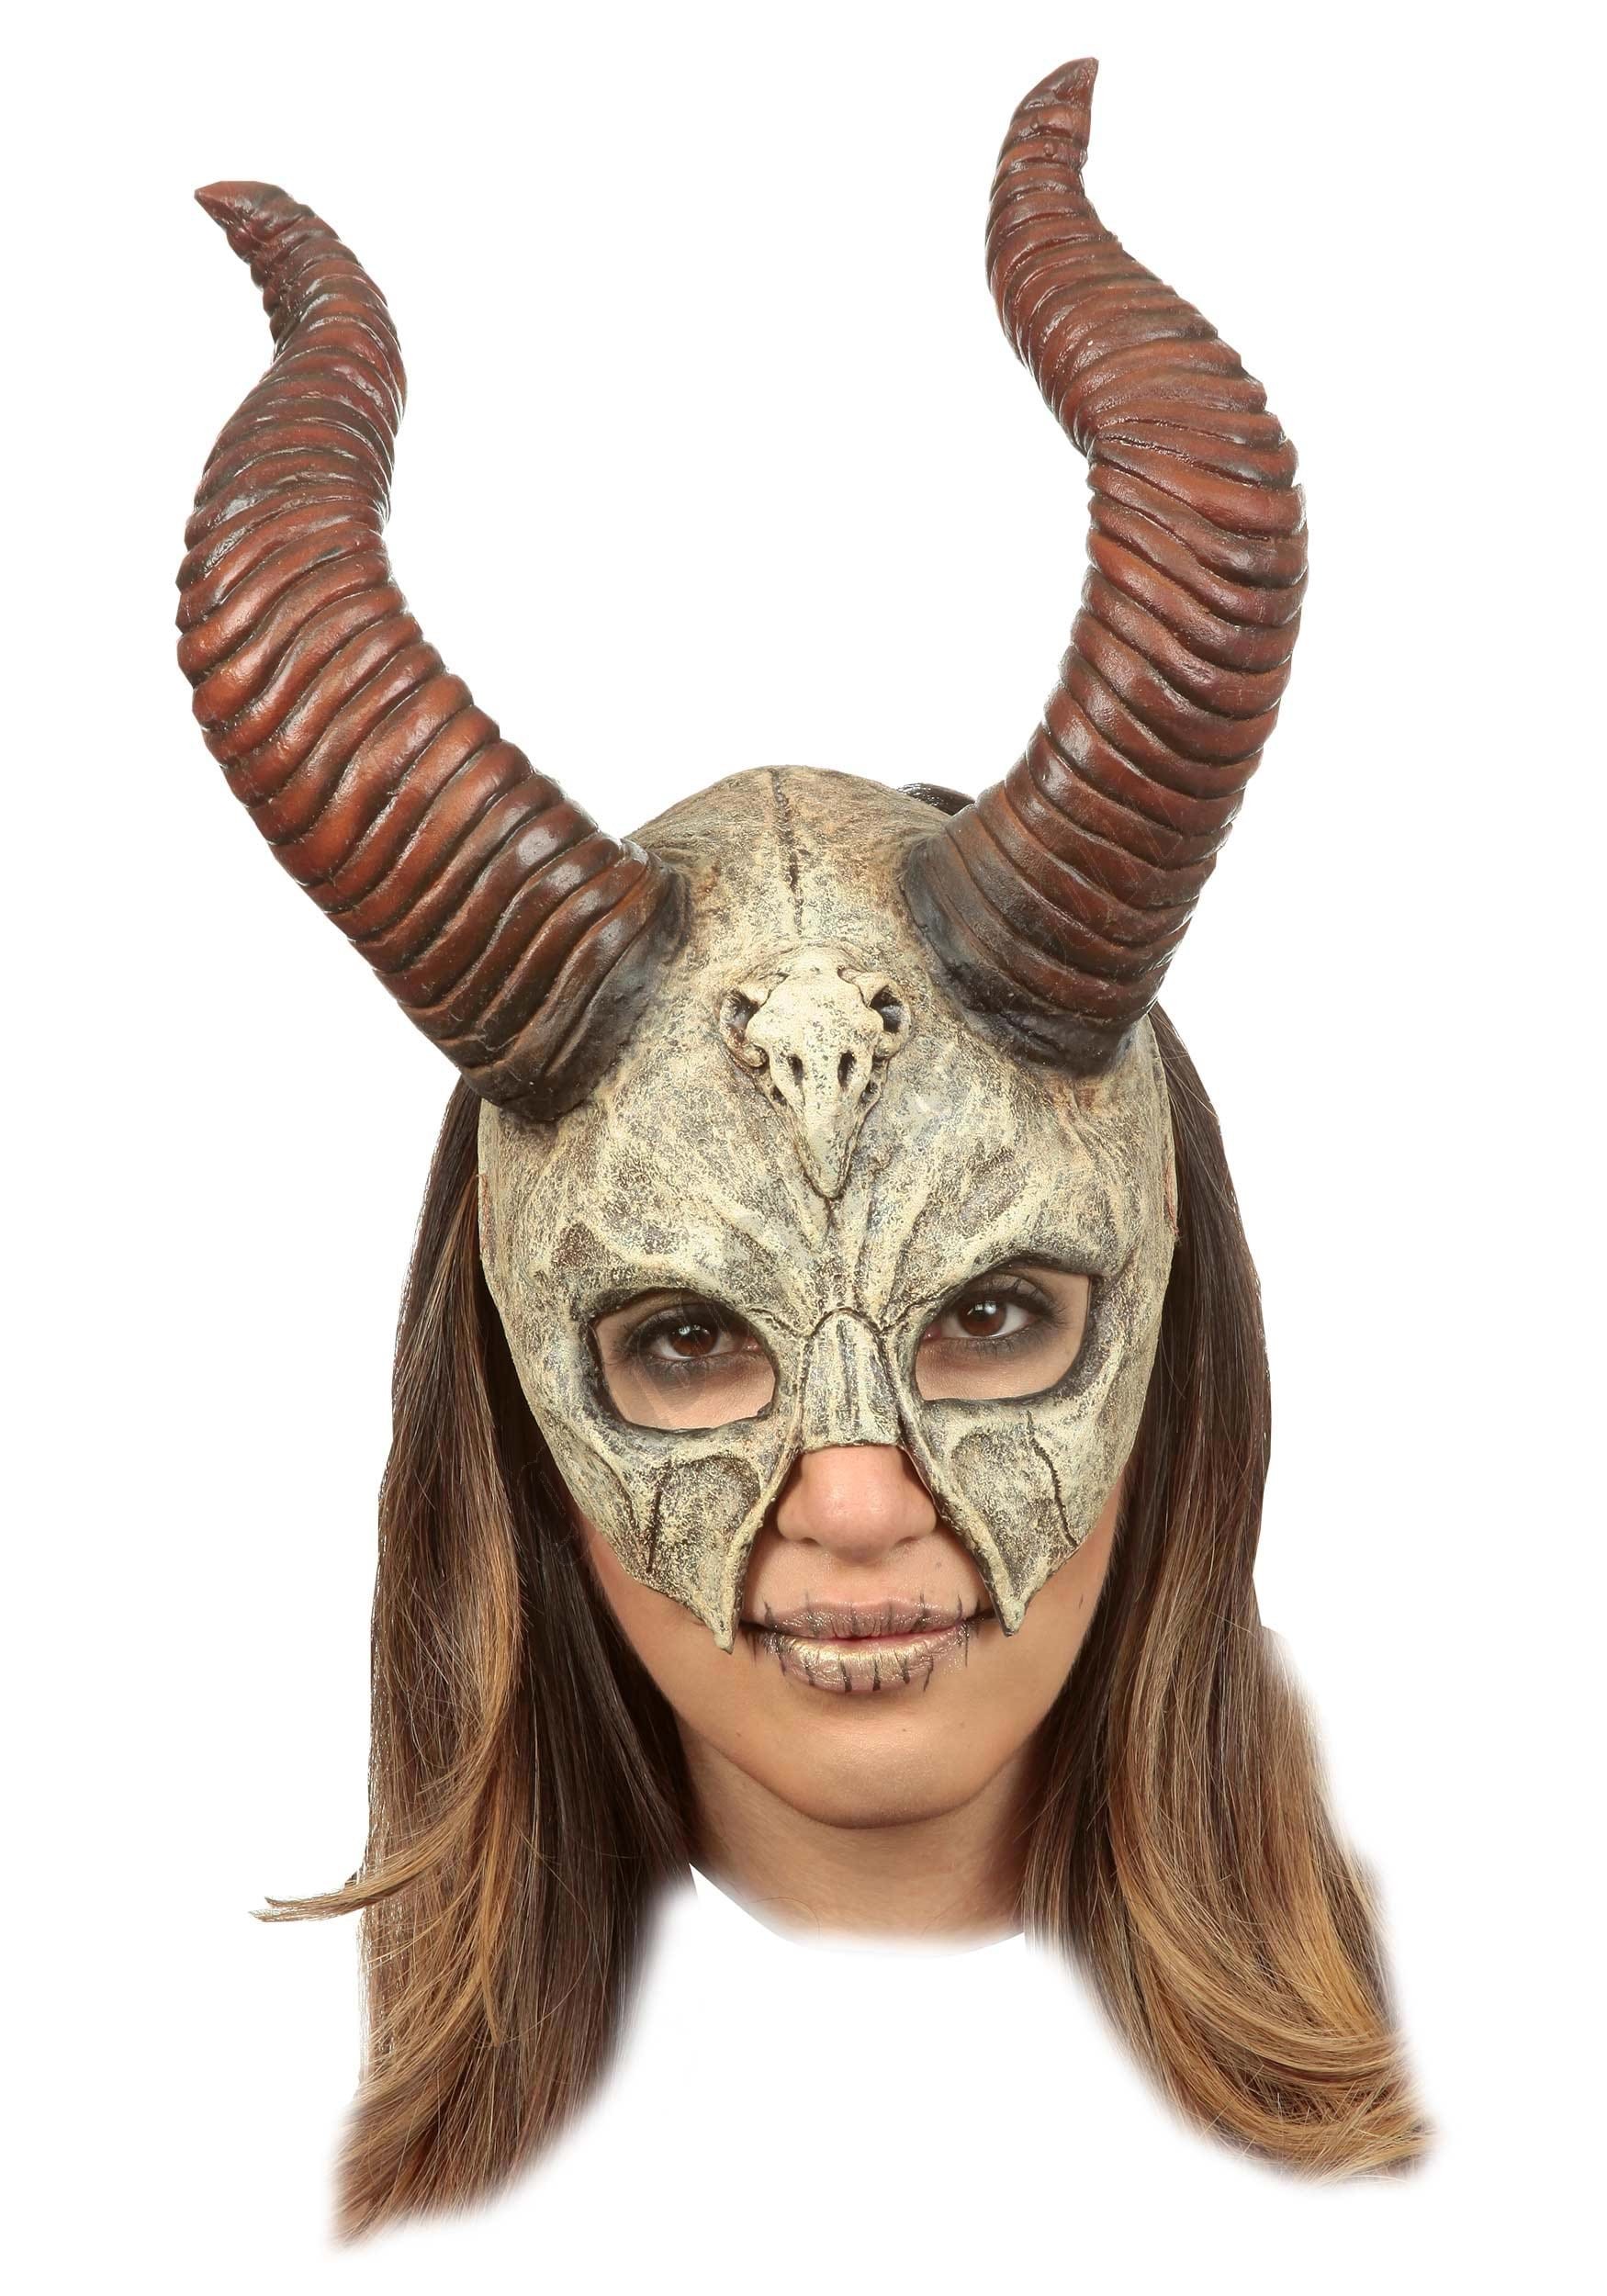 Mythical Skull Mask with Horns Promotions - Mythical Skull Mask with Horns Promotions